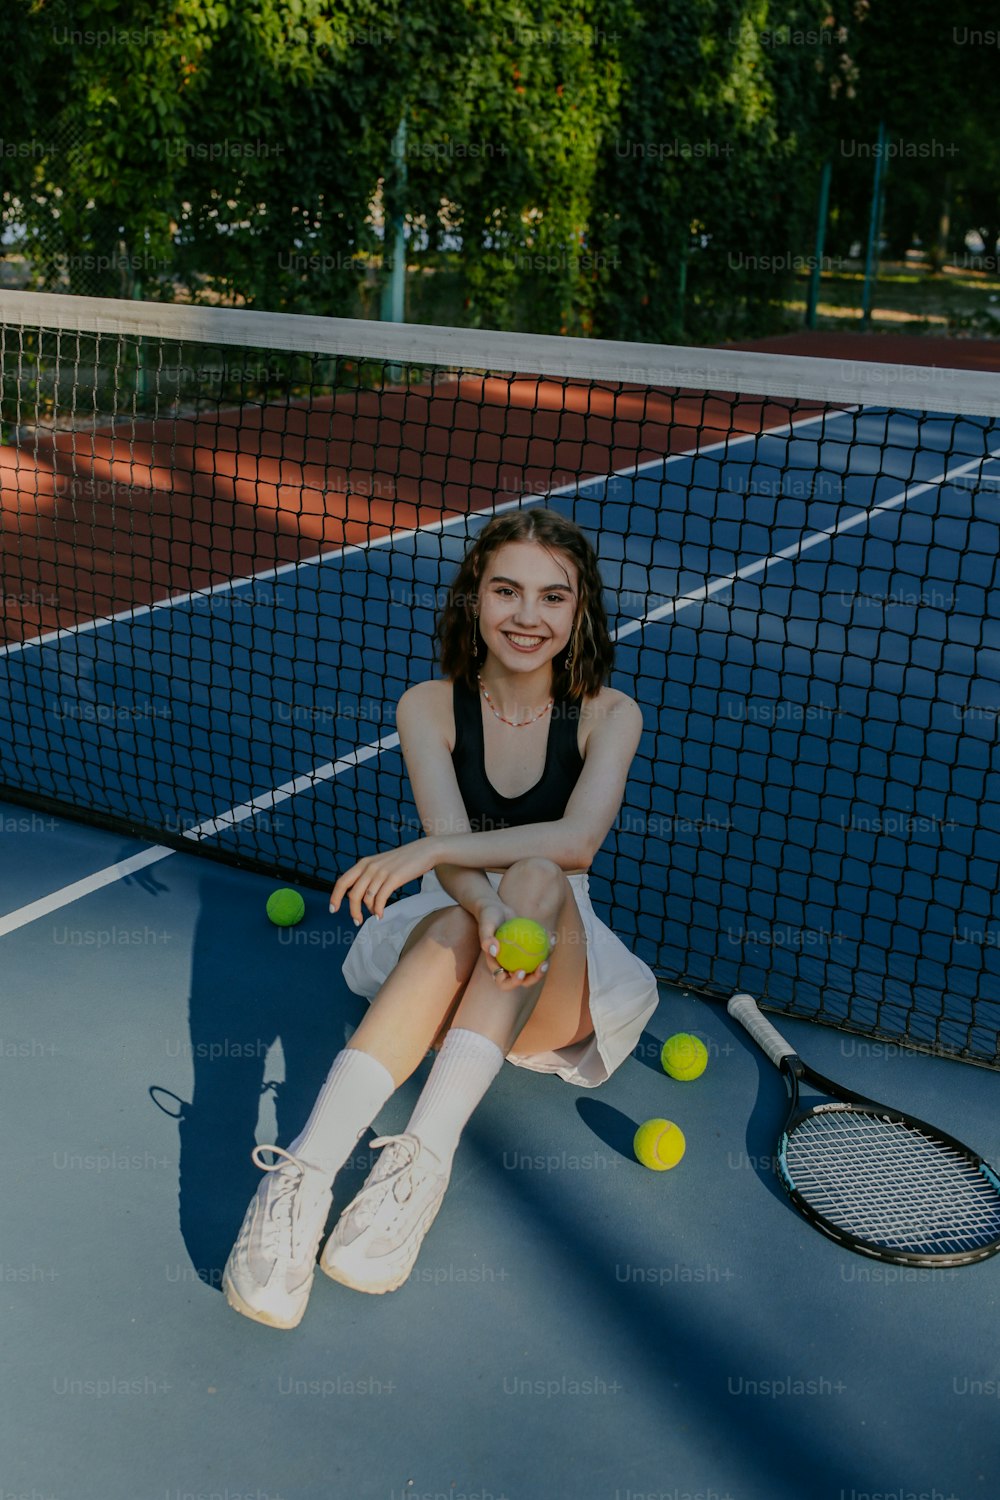 a woman sitting on a tennis court holding a tennis racket